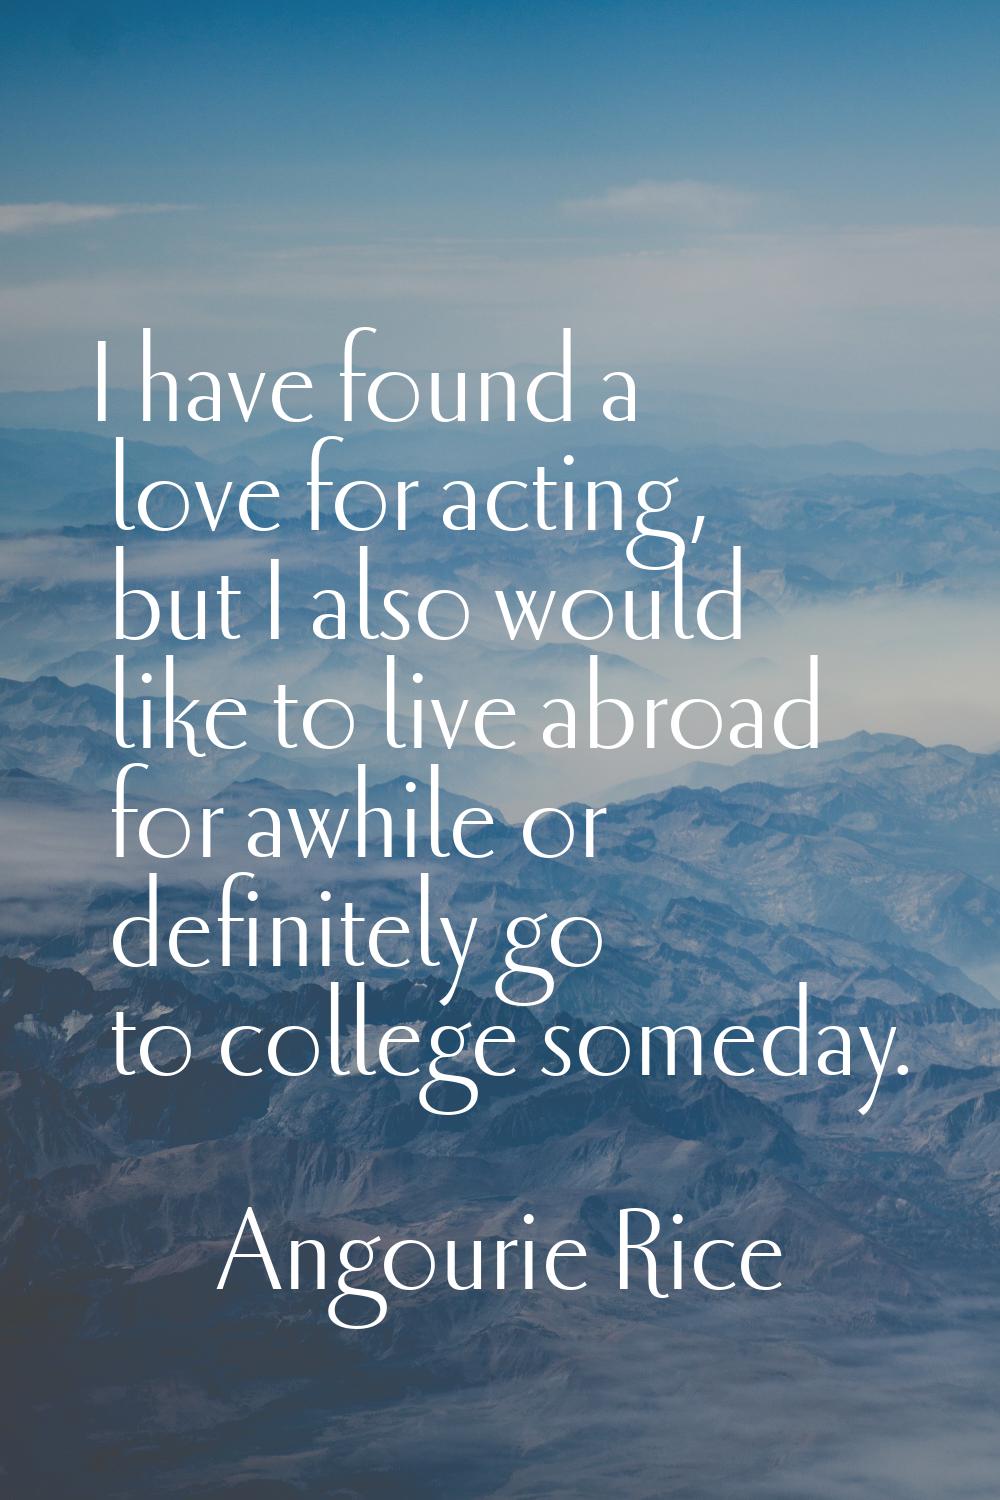 I have found a love for acting, but I also would like to live abroad for awhile or definitely go to